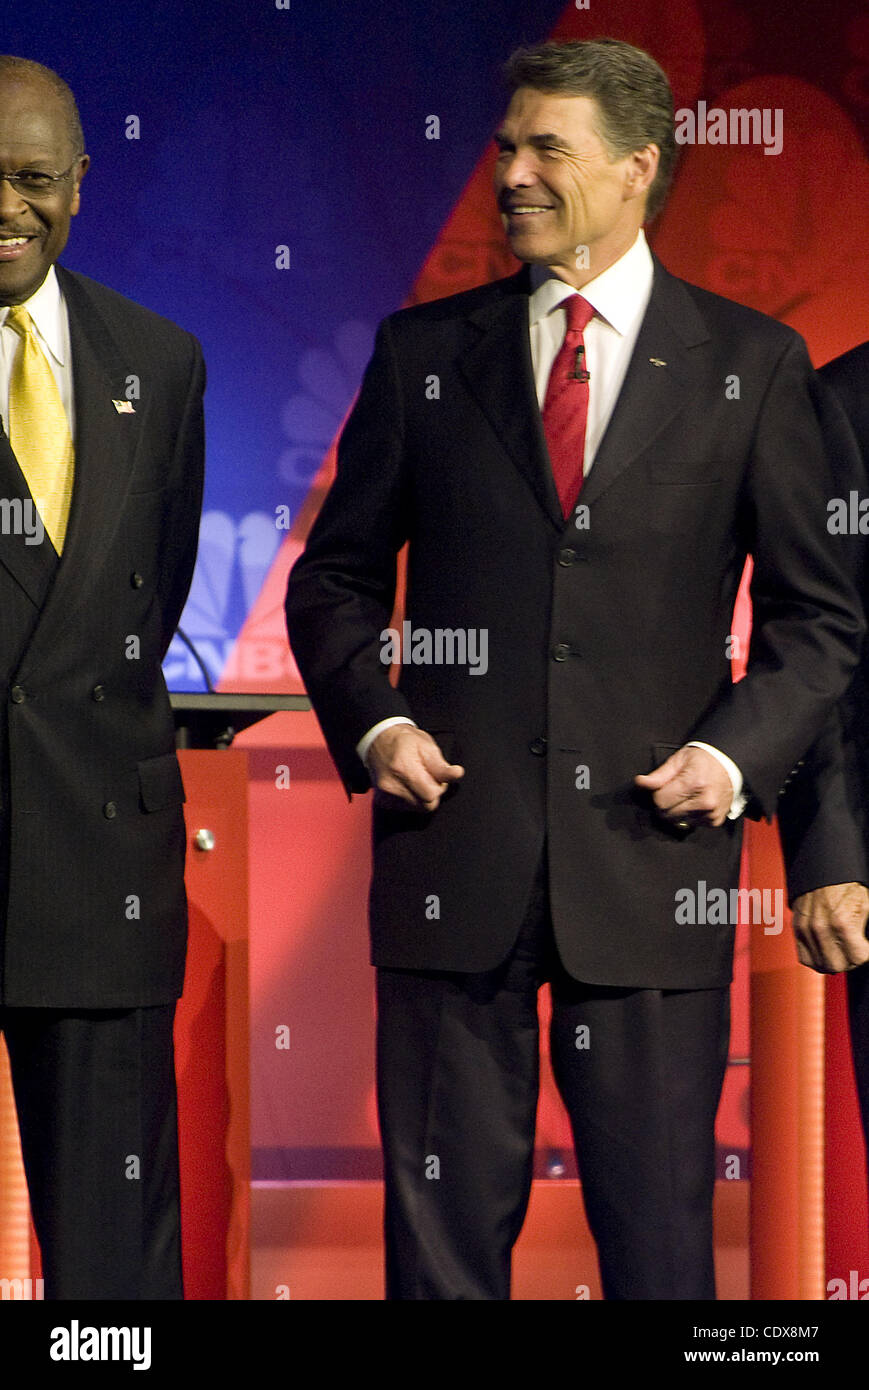 Nov. 9, 2011 - Rochester, Michigan, U.S - RICK PERRY, right,  stands next to Herman Cain, as they line up at the start of a republican presidential debate hosted by CNBC at Oakland University. Rick Perry suffered a gaffe at the GOP debate in Detroit Wednesday when he couldn't remember one of the thr Stock Photo